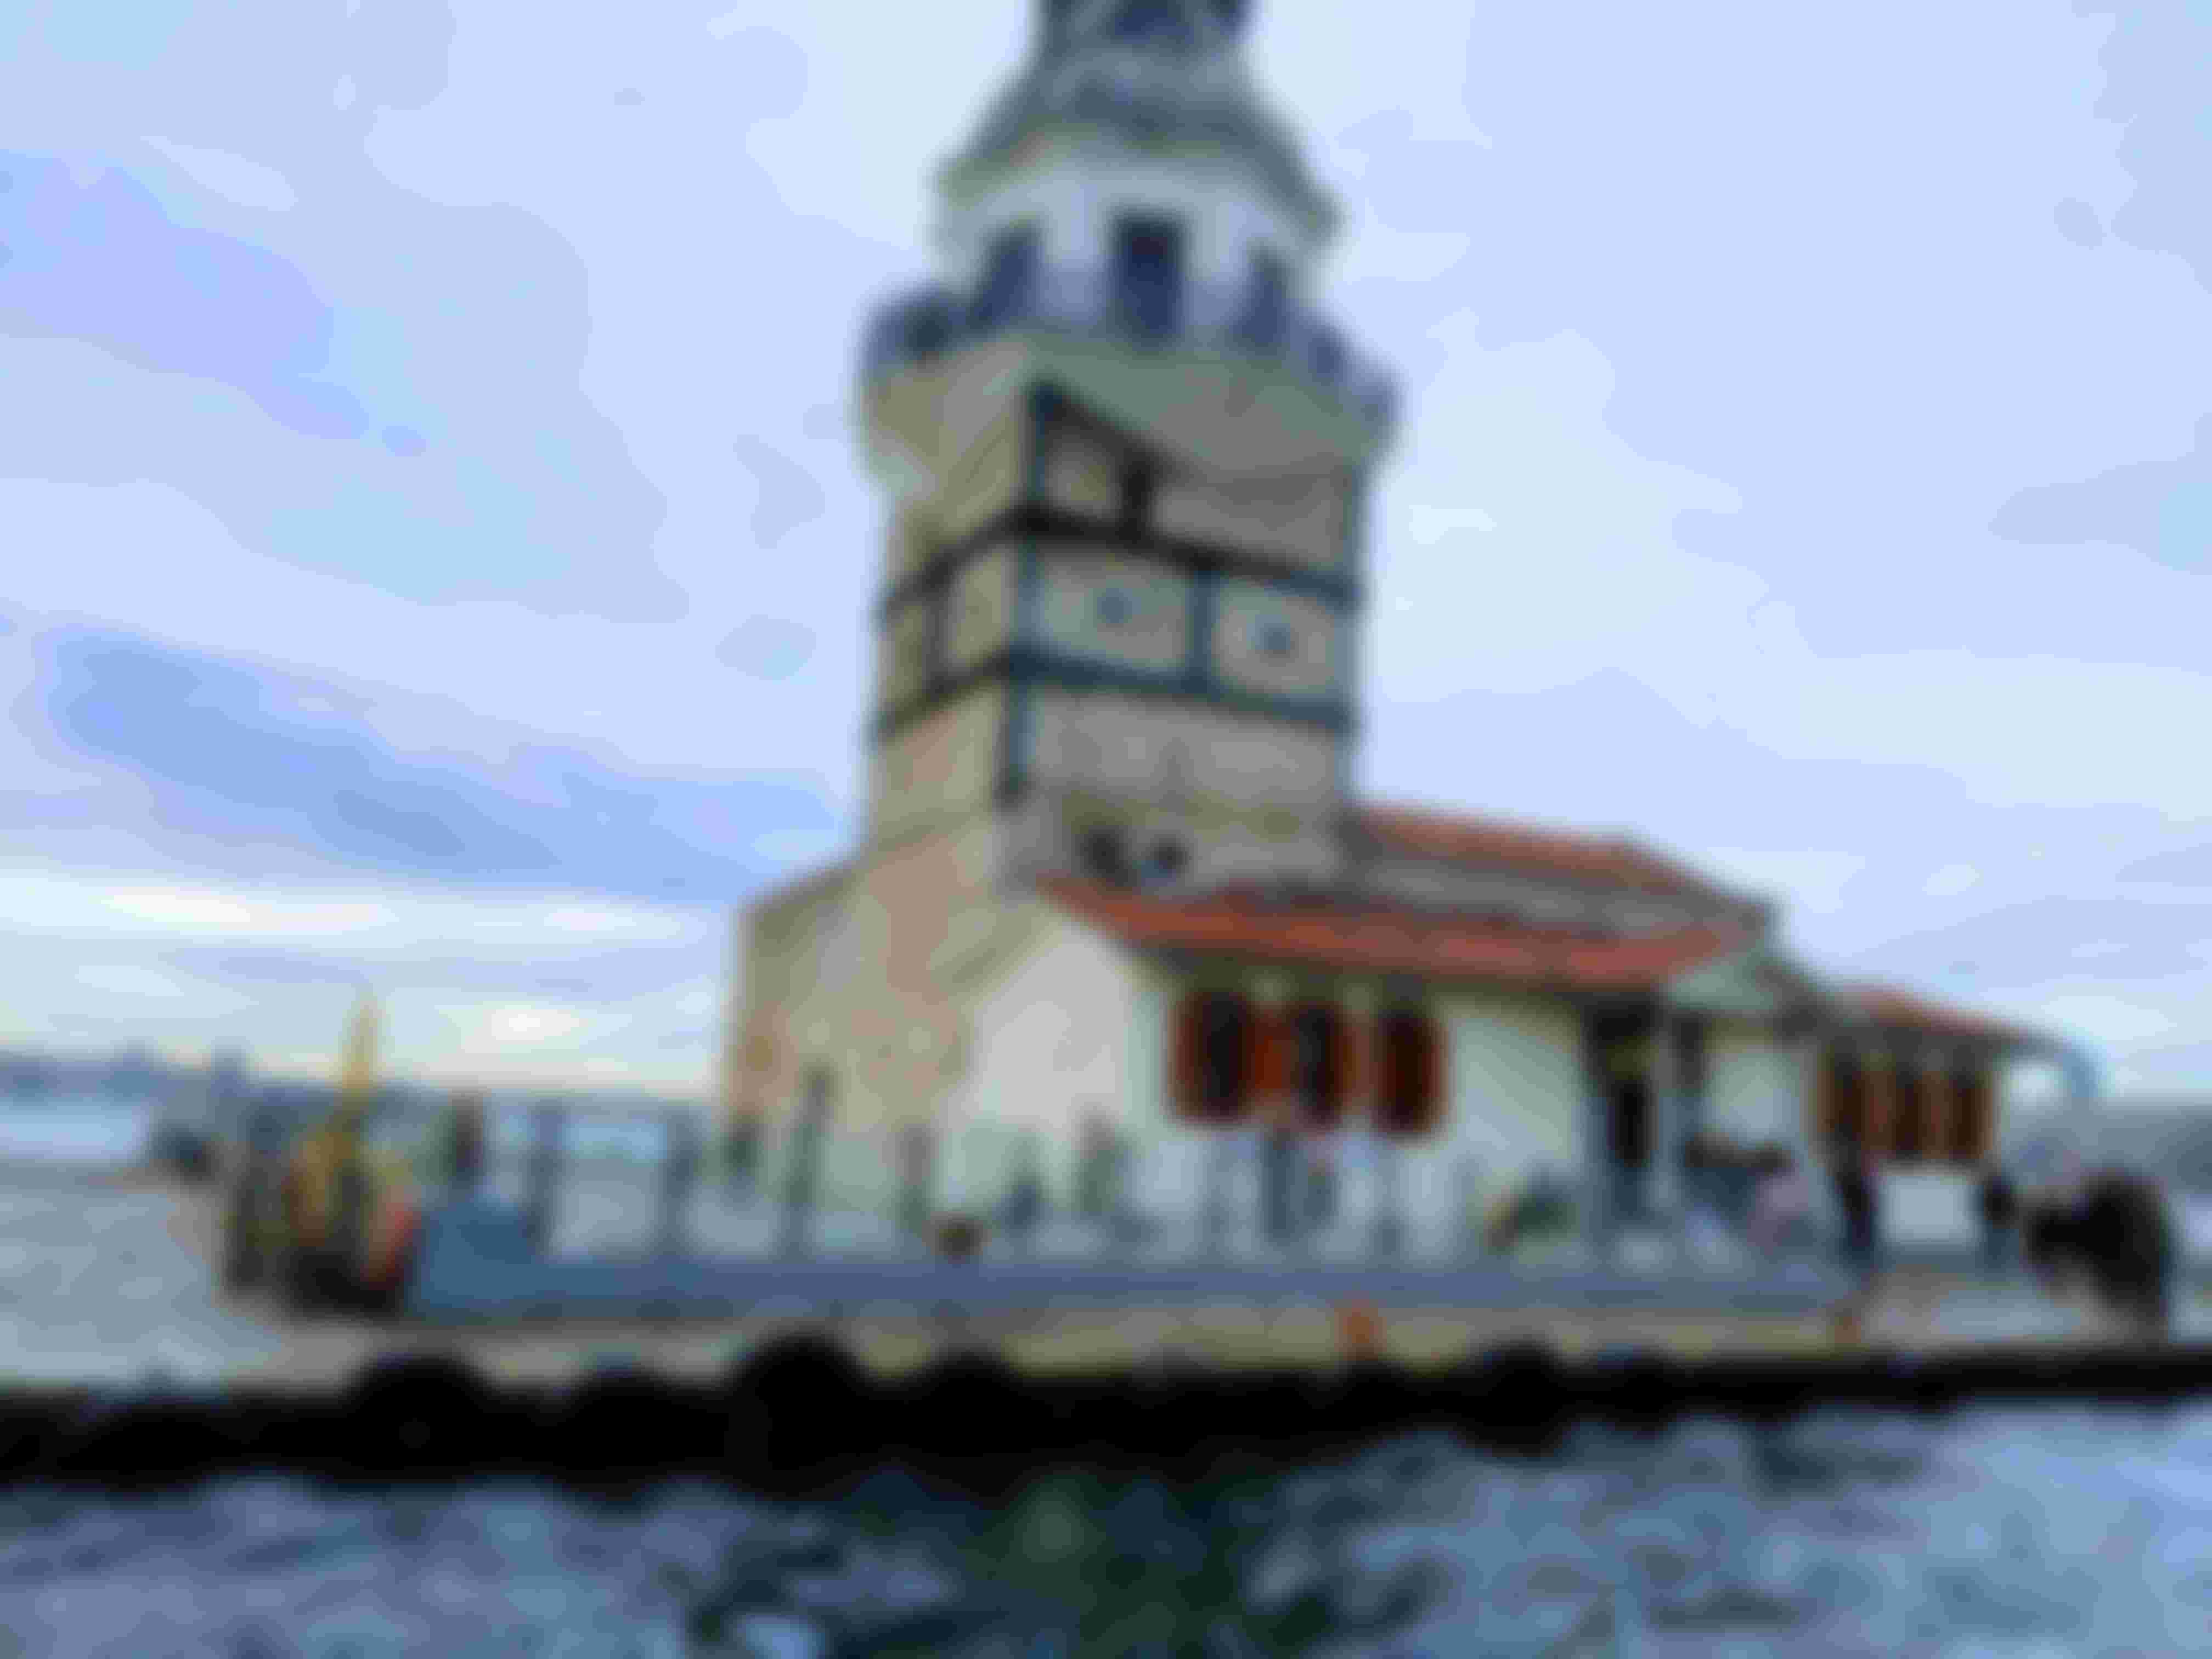 The Maiden's Tower in Istanbul